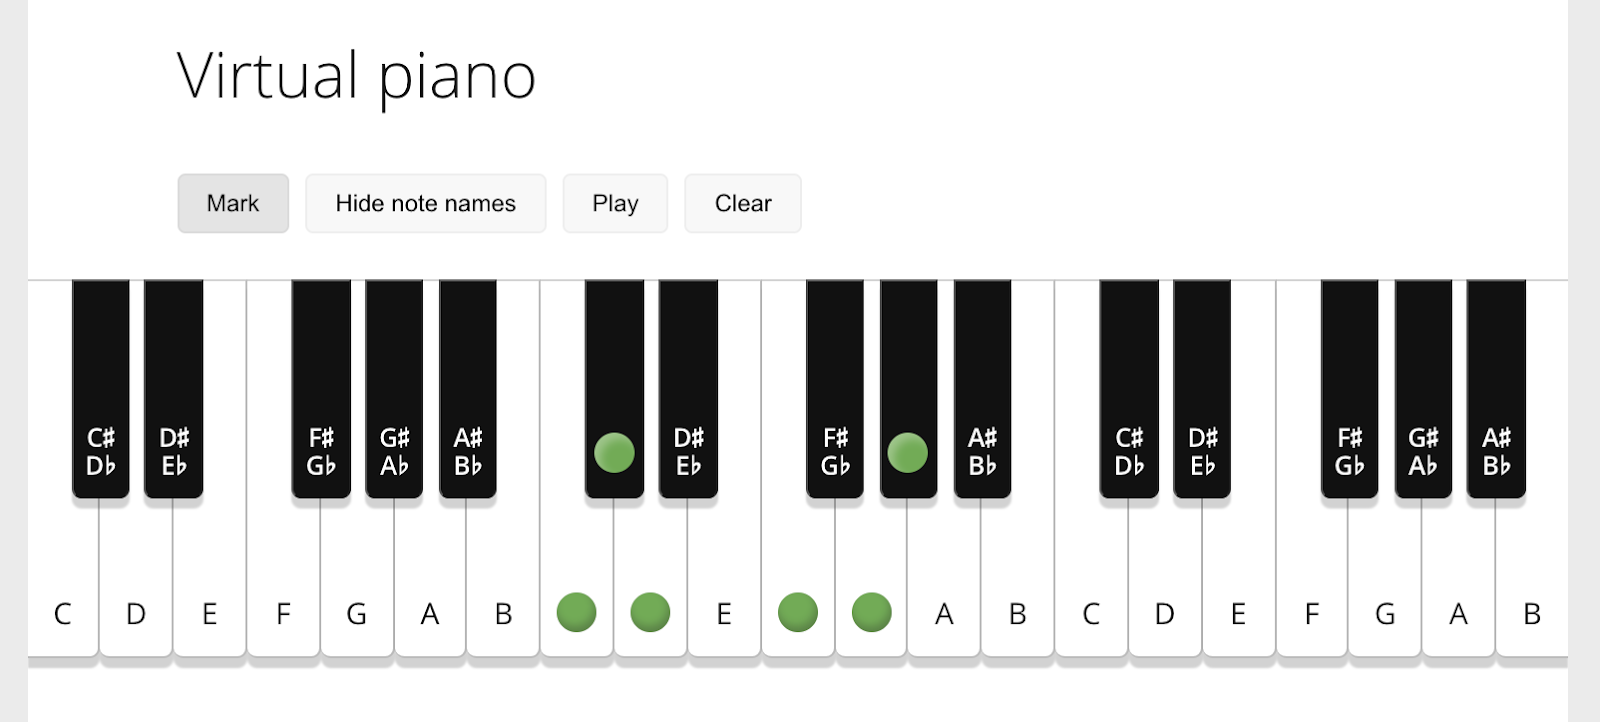 Musicca virtual piano with mark and play function.